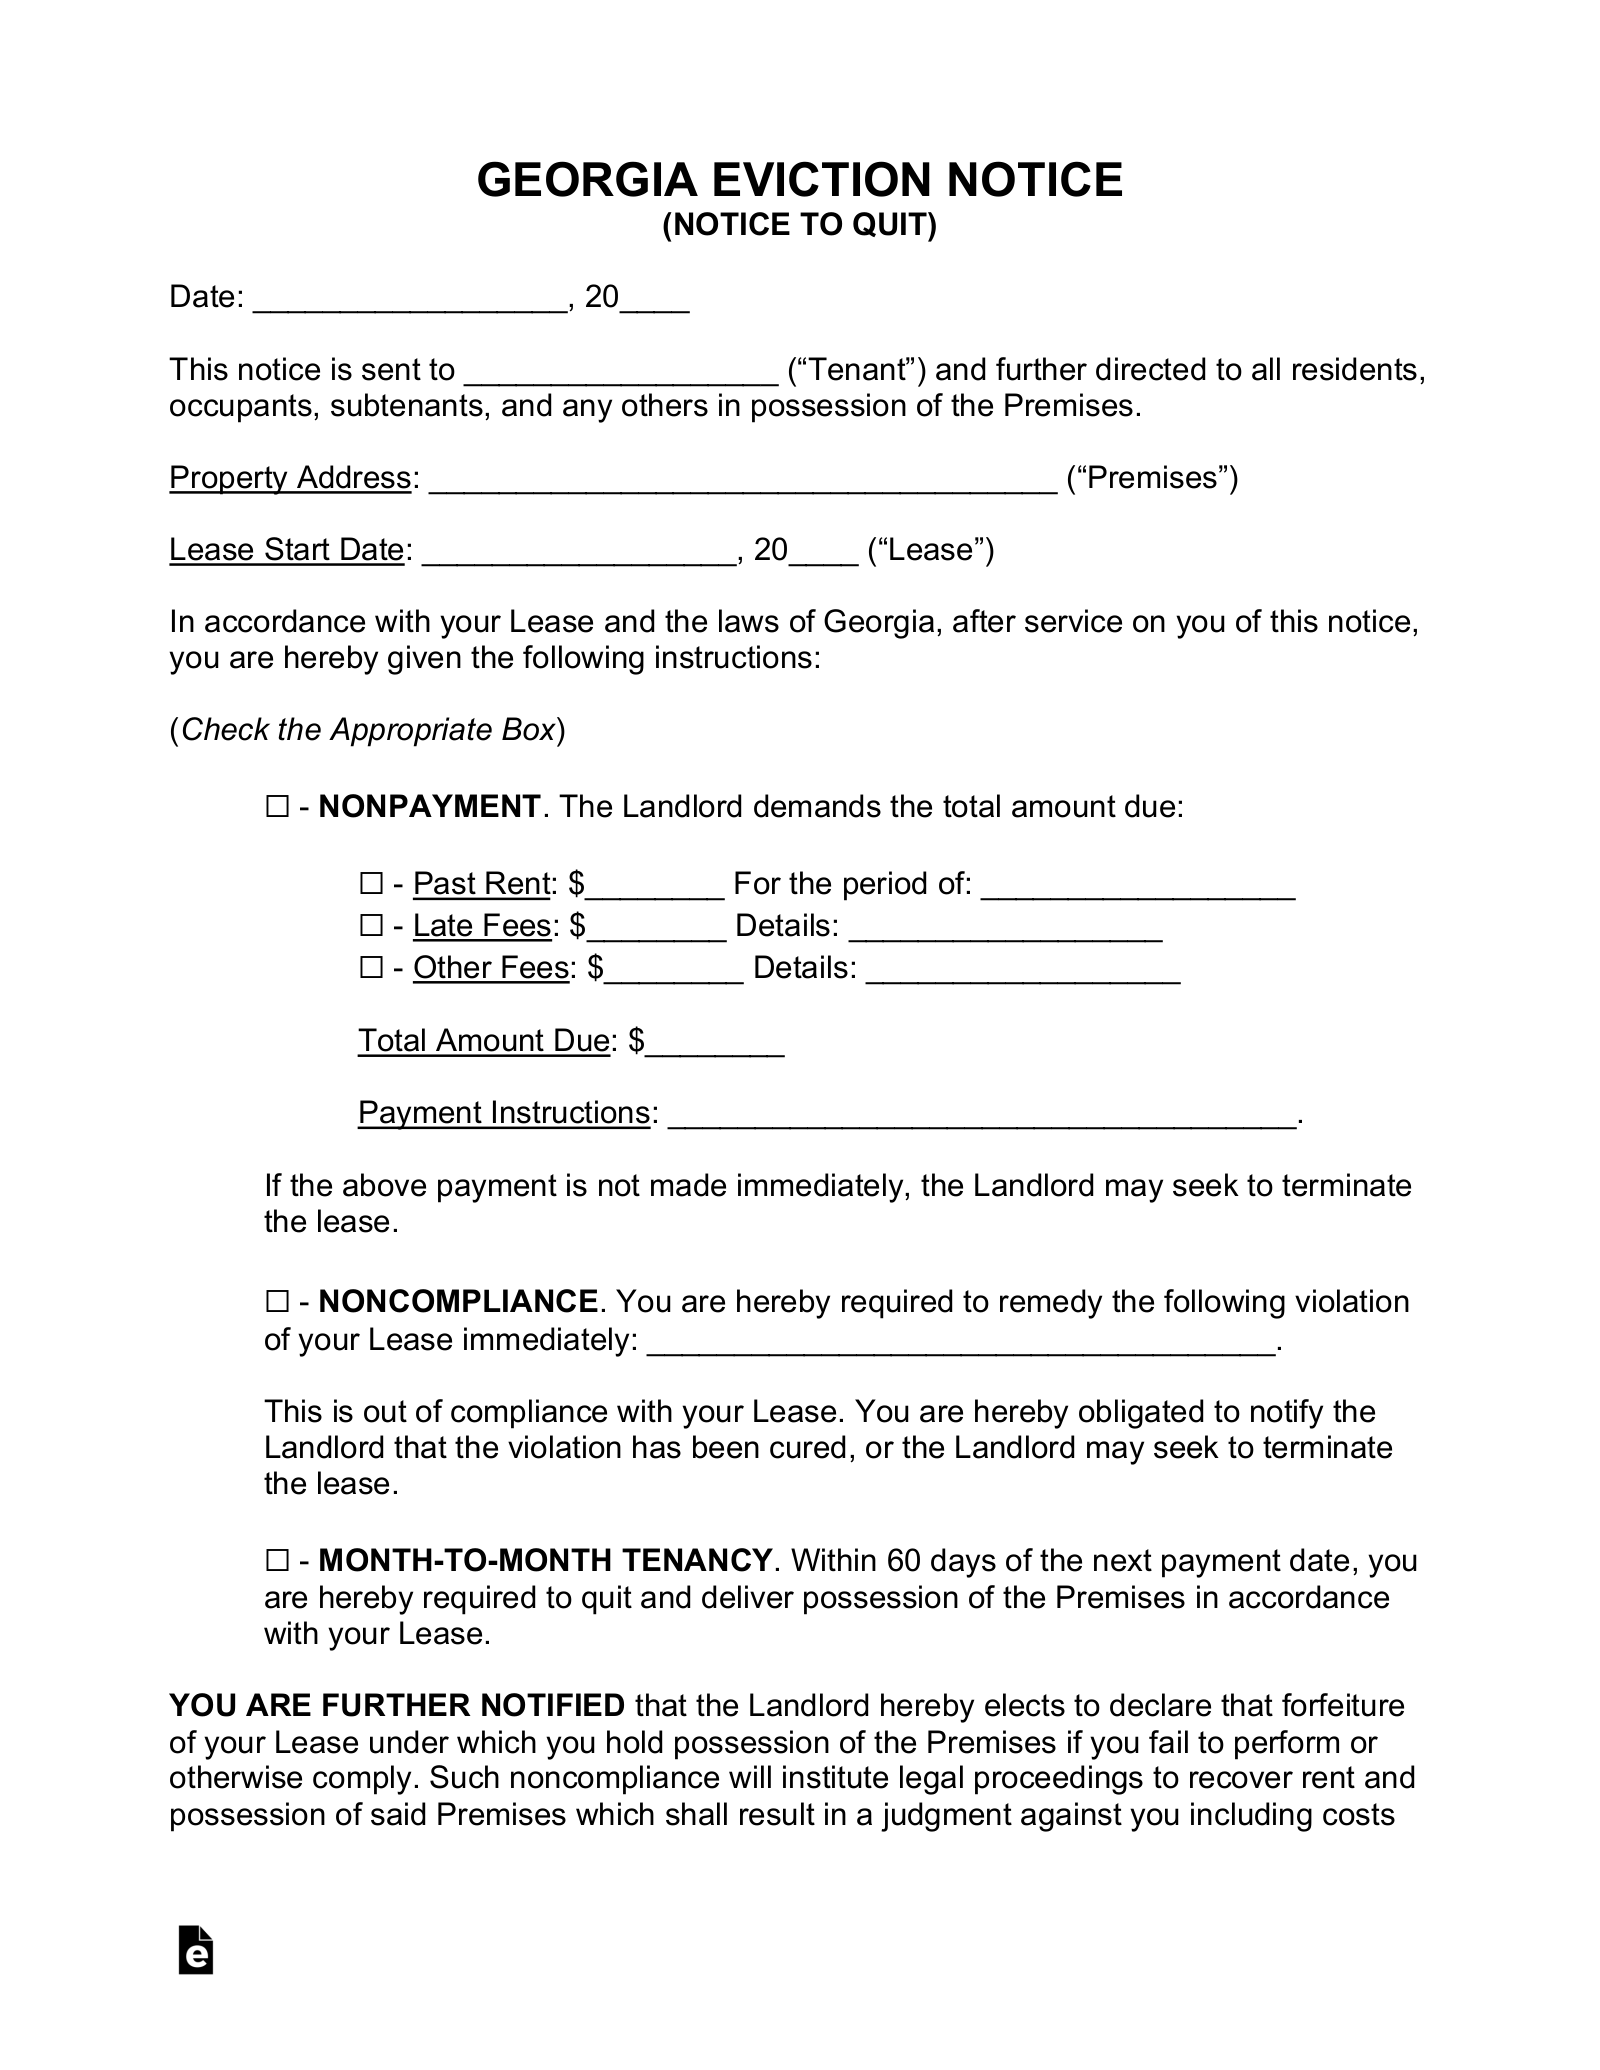 Georgia Eviction Notice Forms (3)